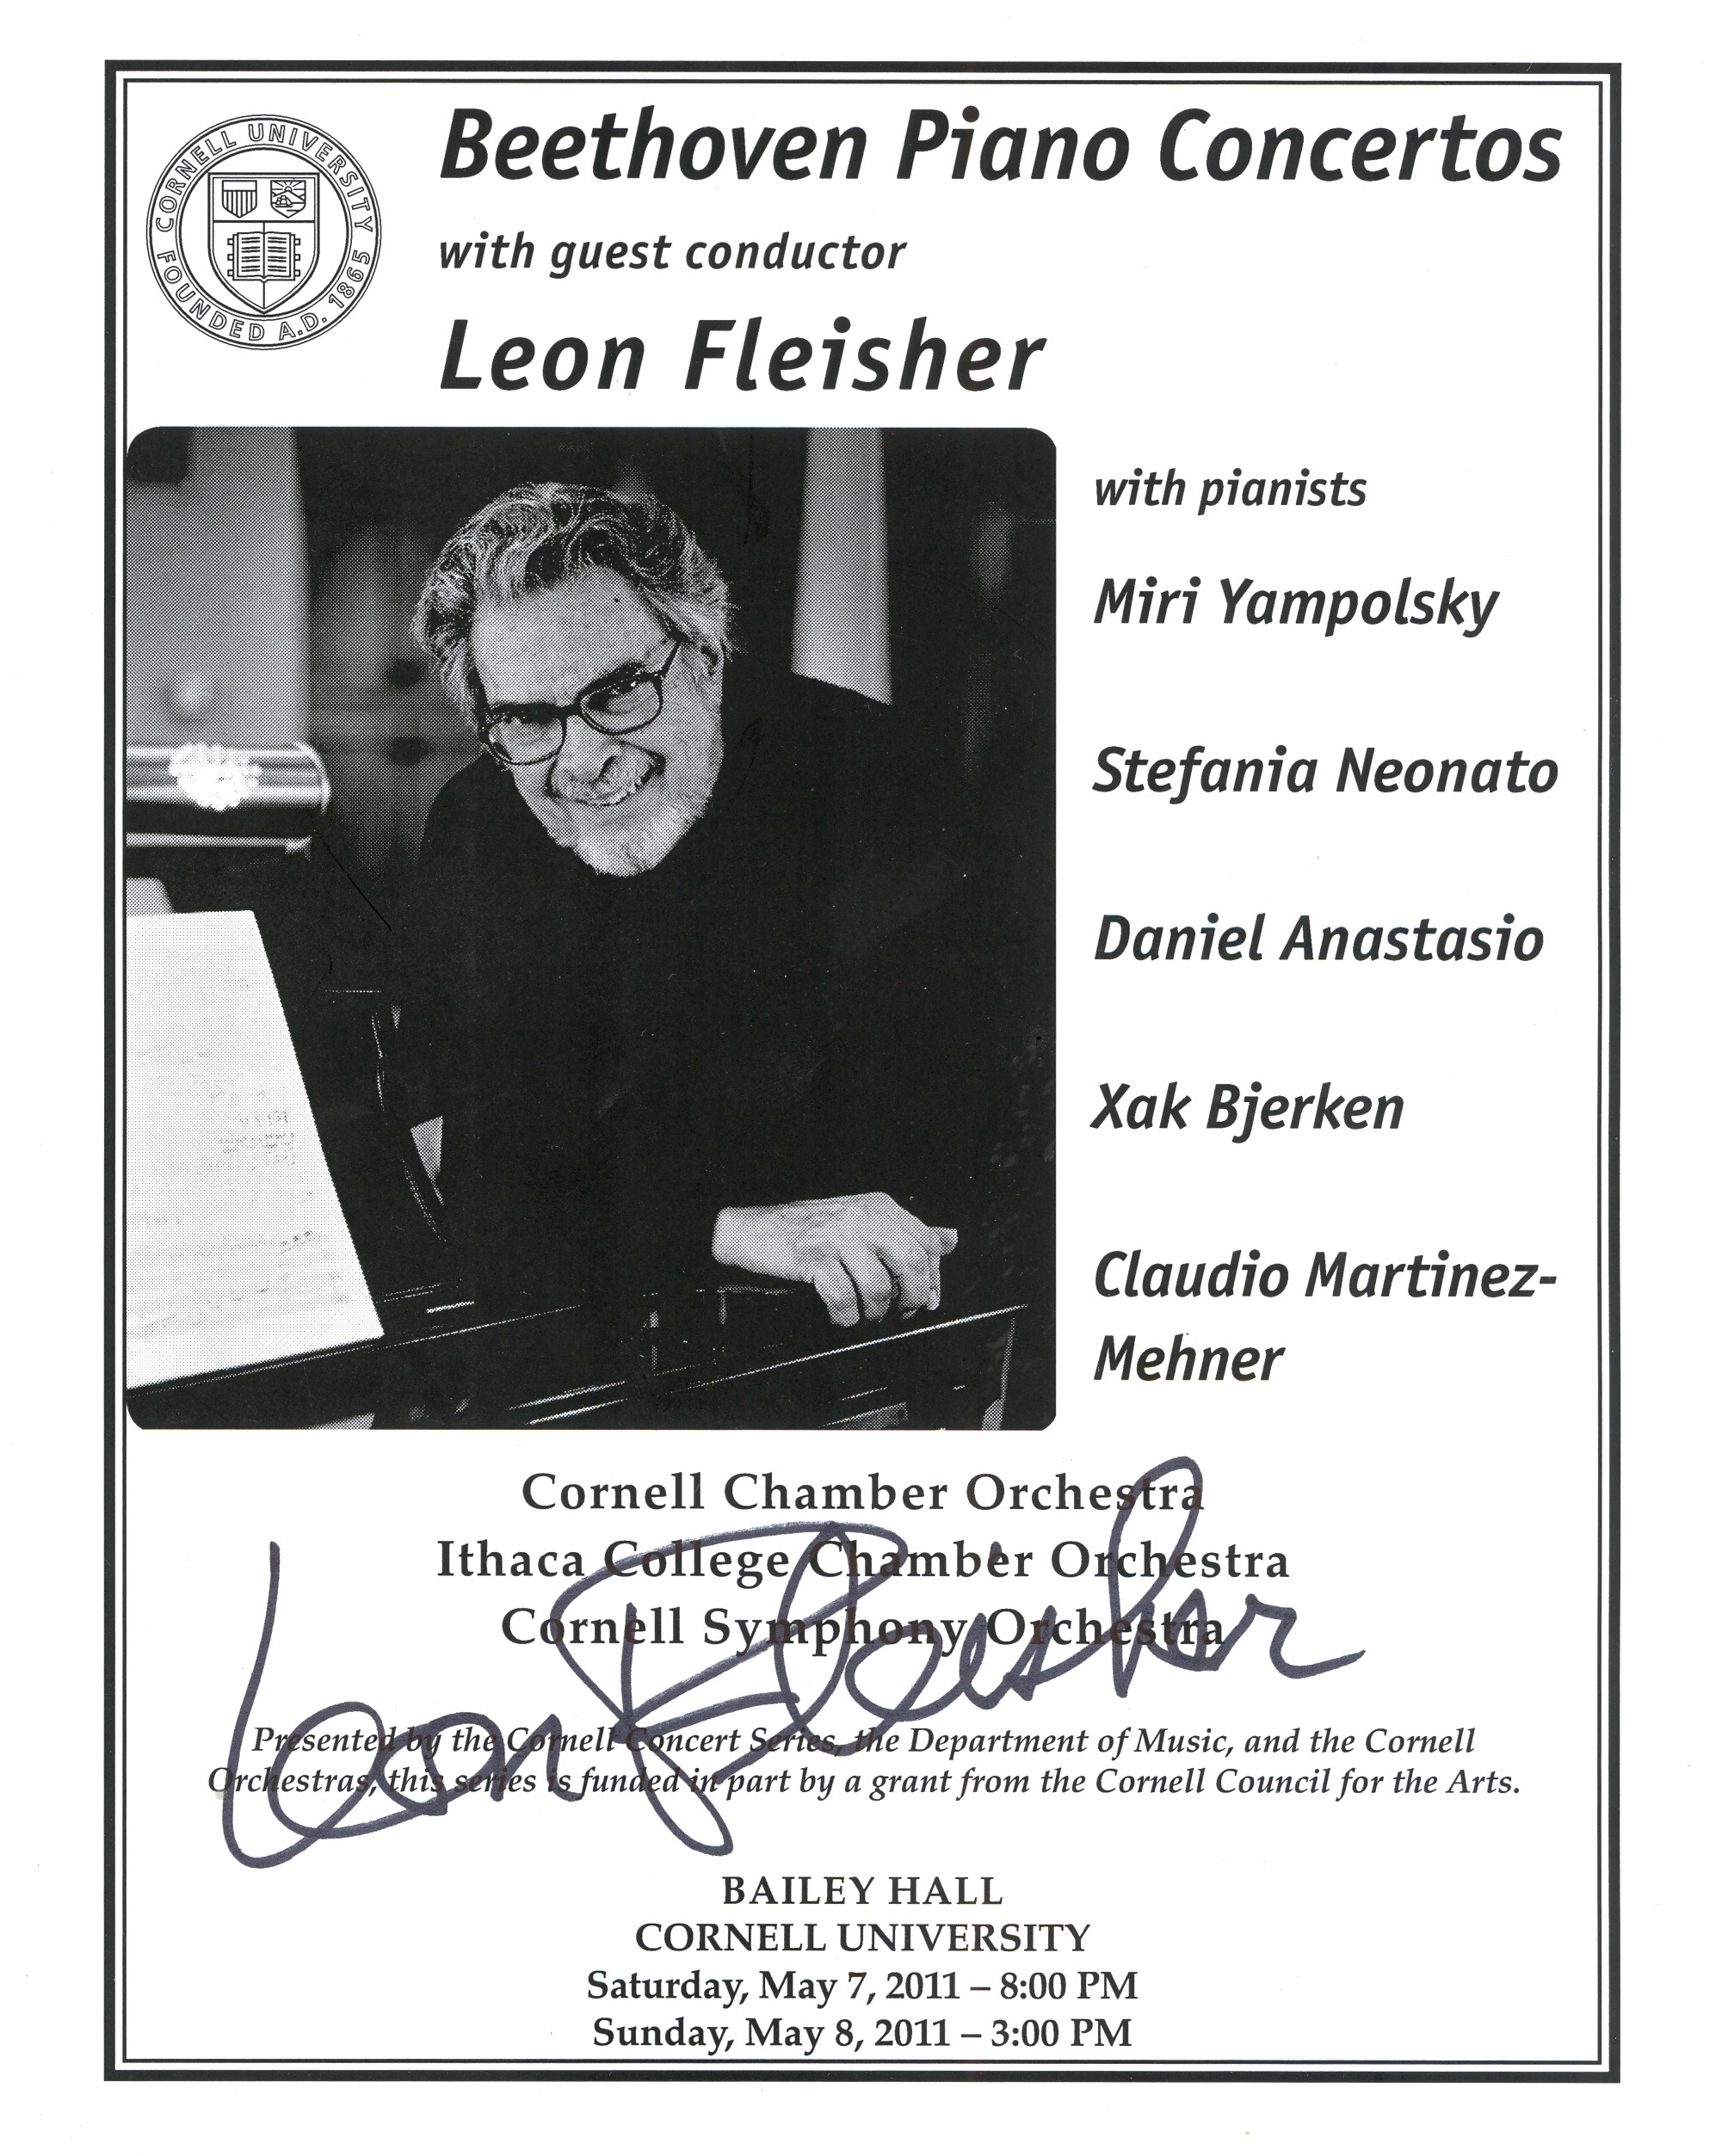 Program for Beethoven Piano Concertos with guest conductor Leon Fleisher